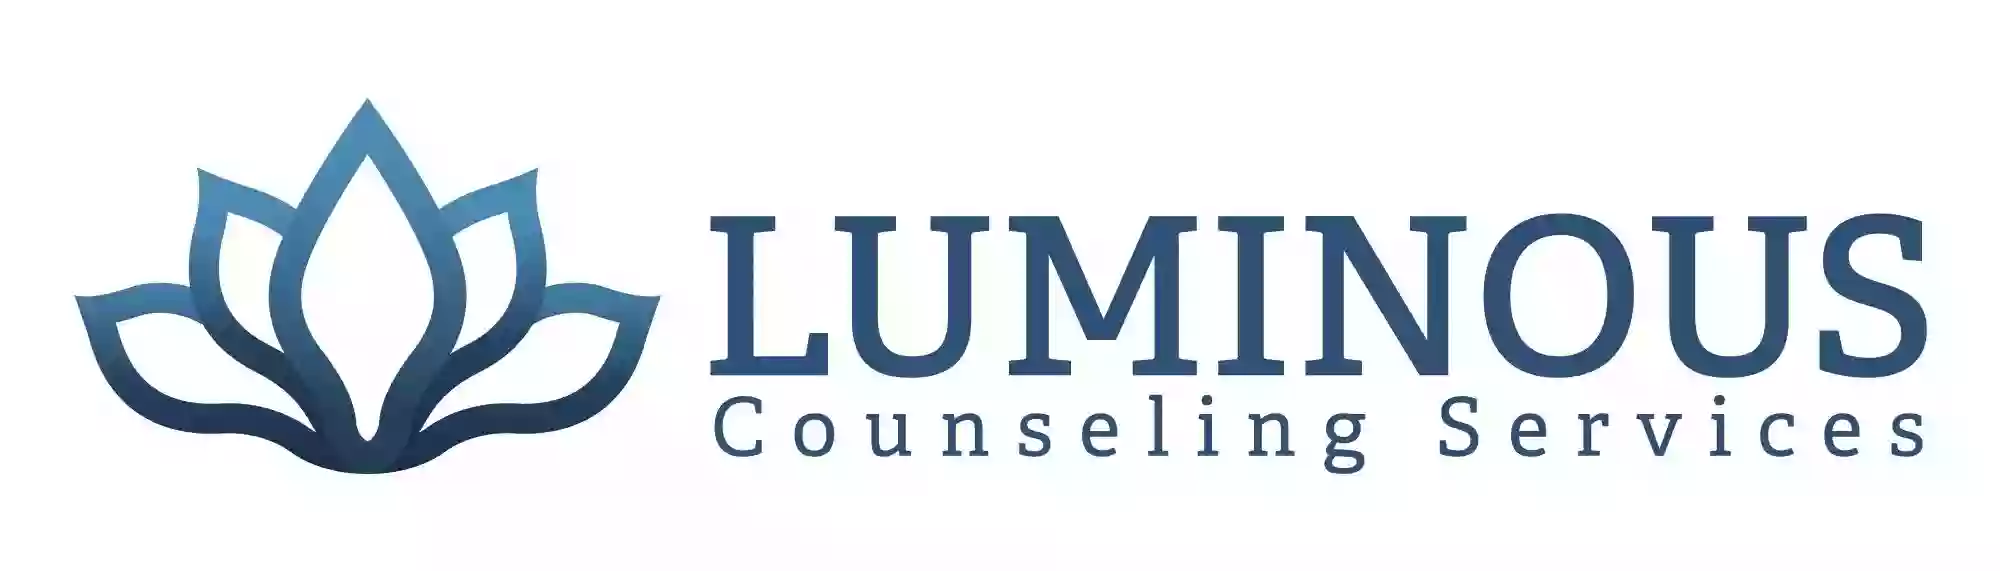 Luminous Counseling Services